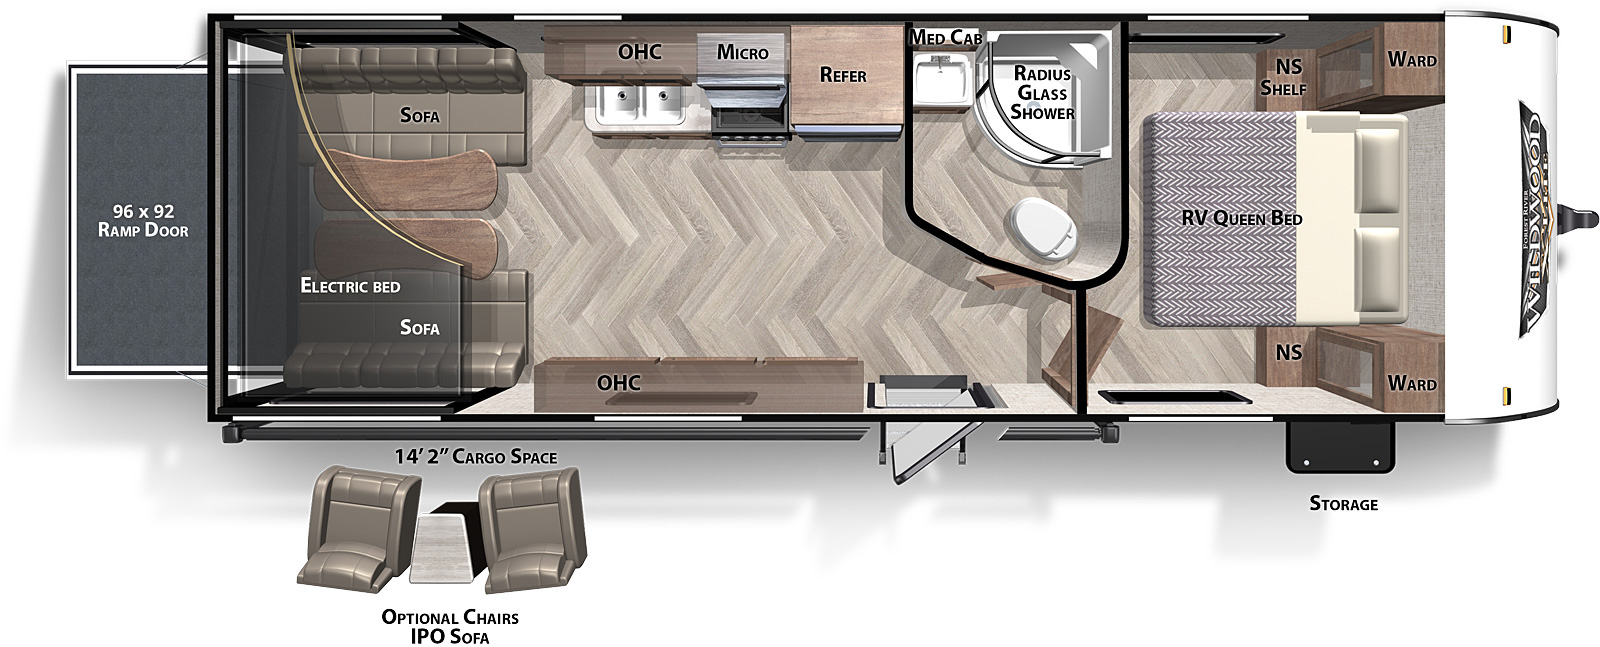 X-Lite Northwest 251SSXL floorplan. The 251SSXL has no slide outs and one entry door.